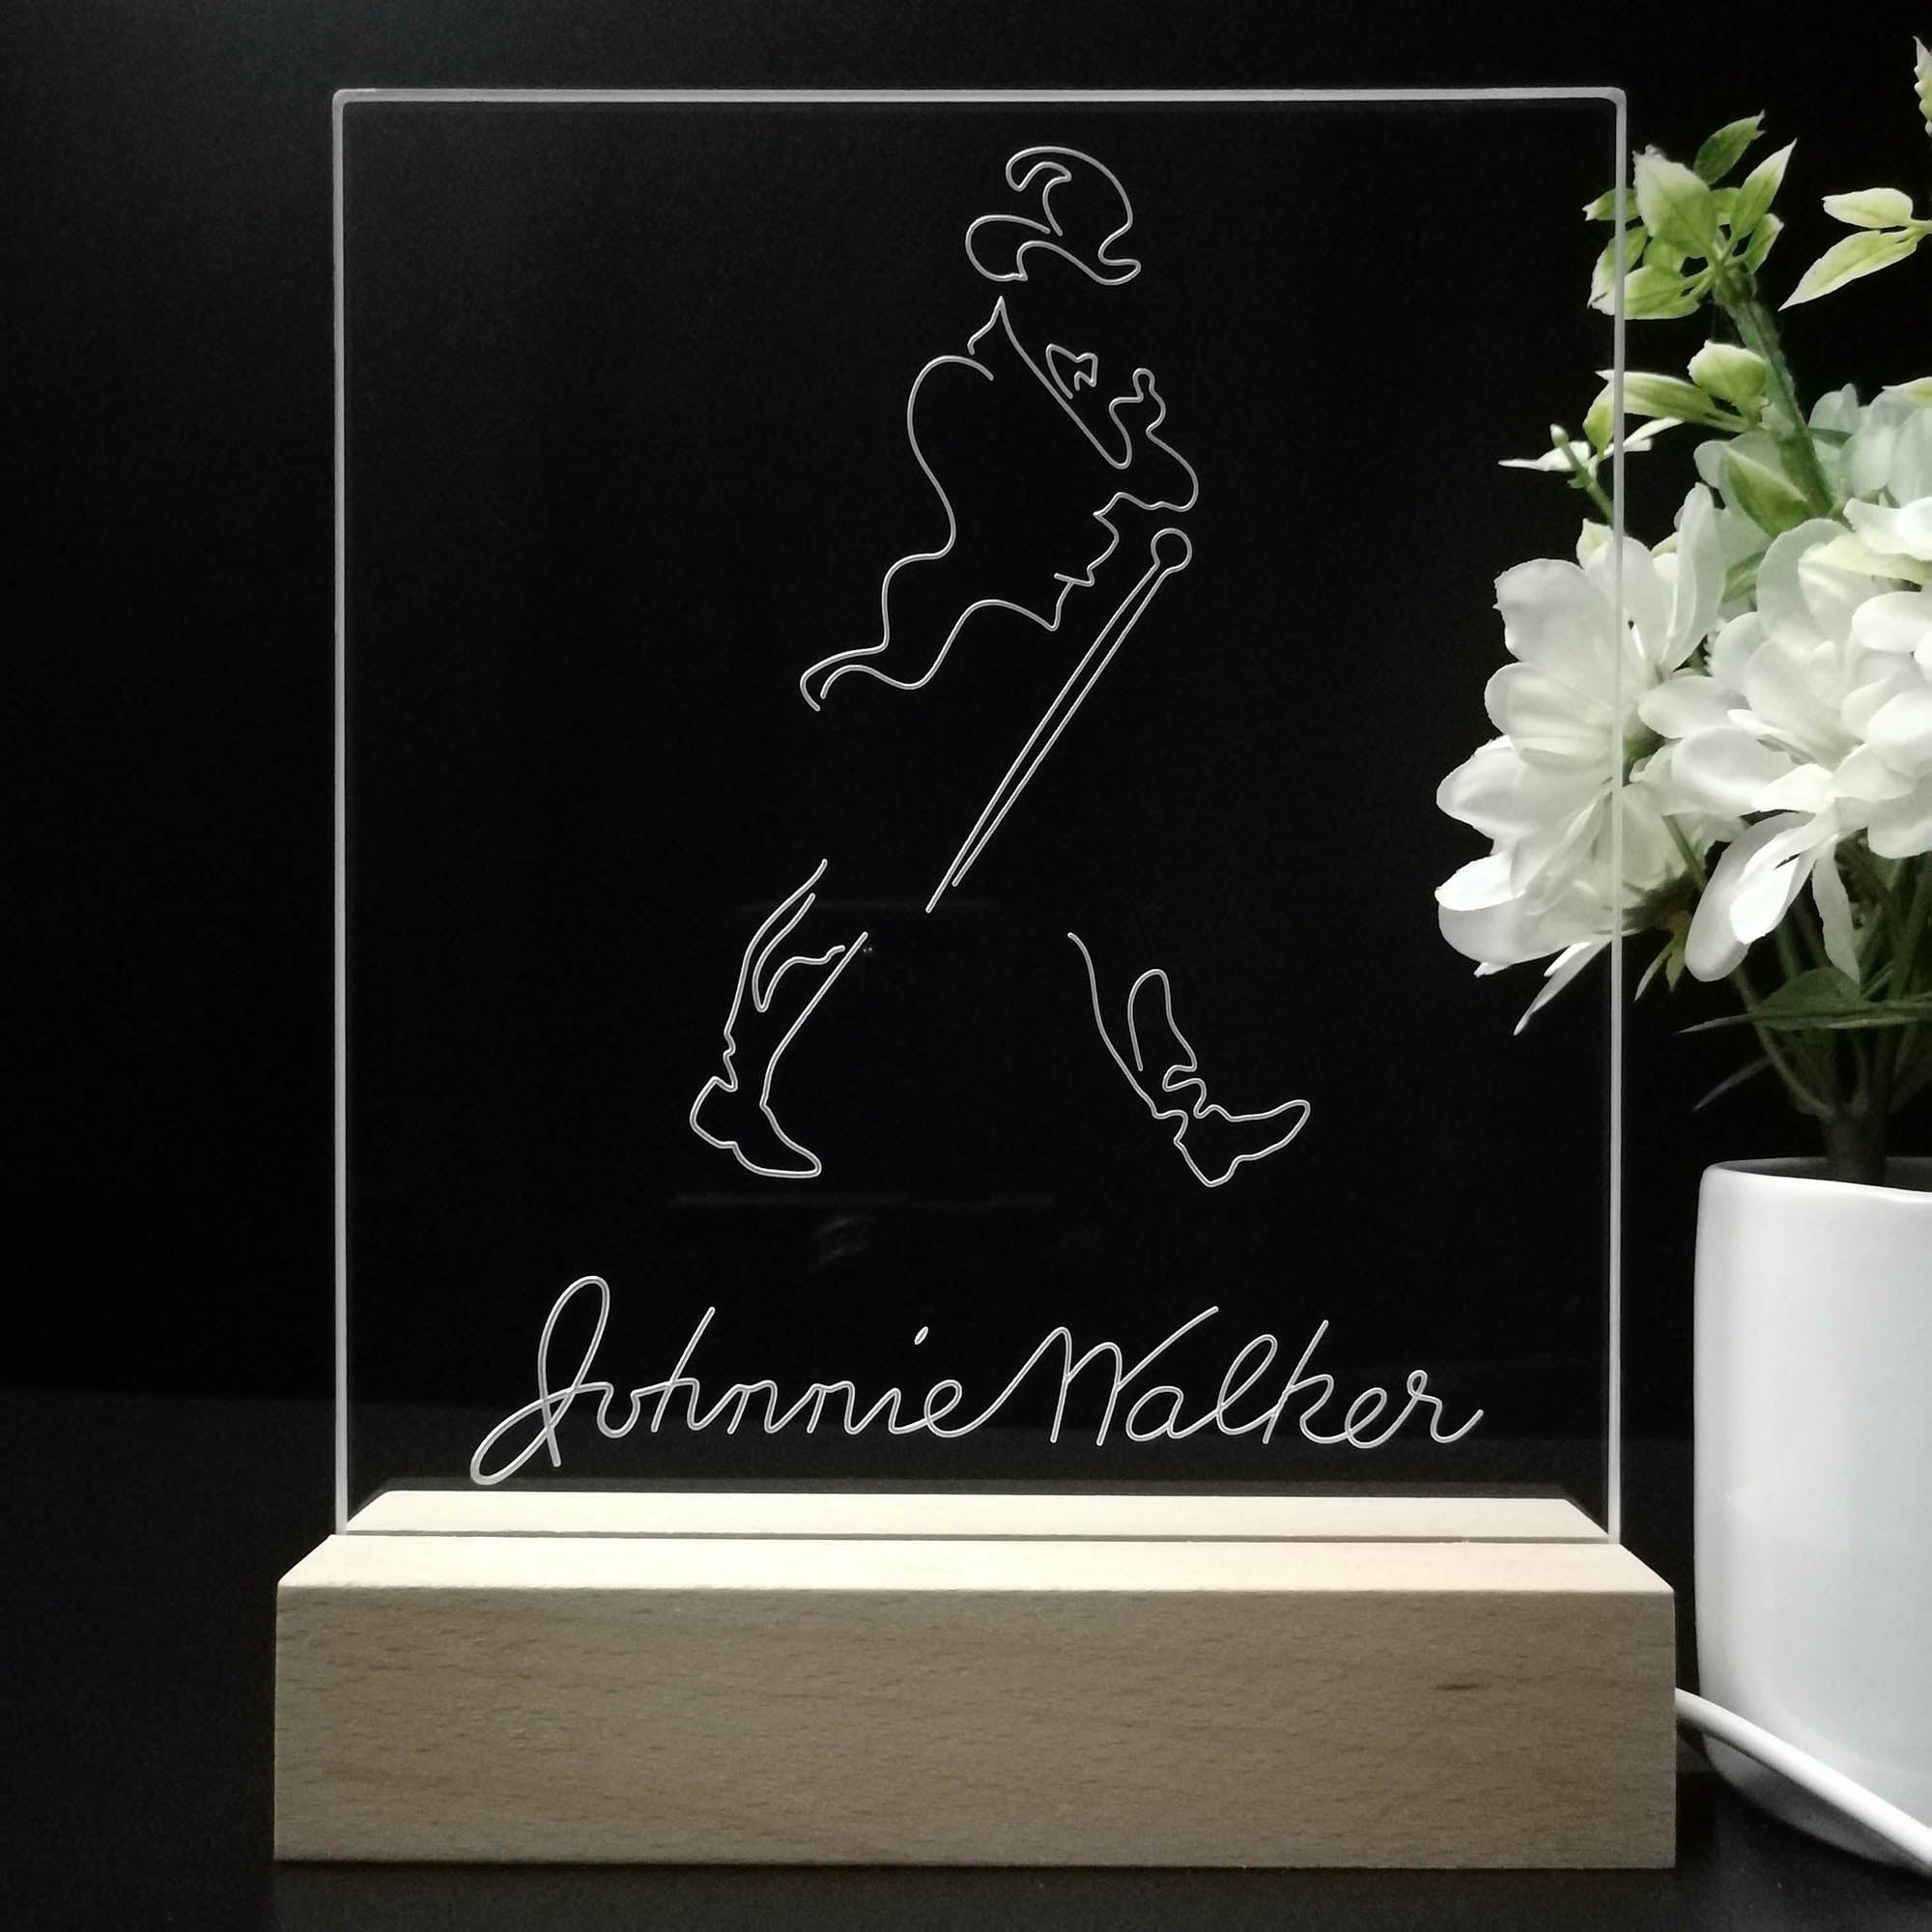 Johnnie Walker Right 3D LED Optical Illusion Night Light Table Lamp